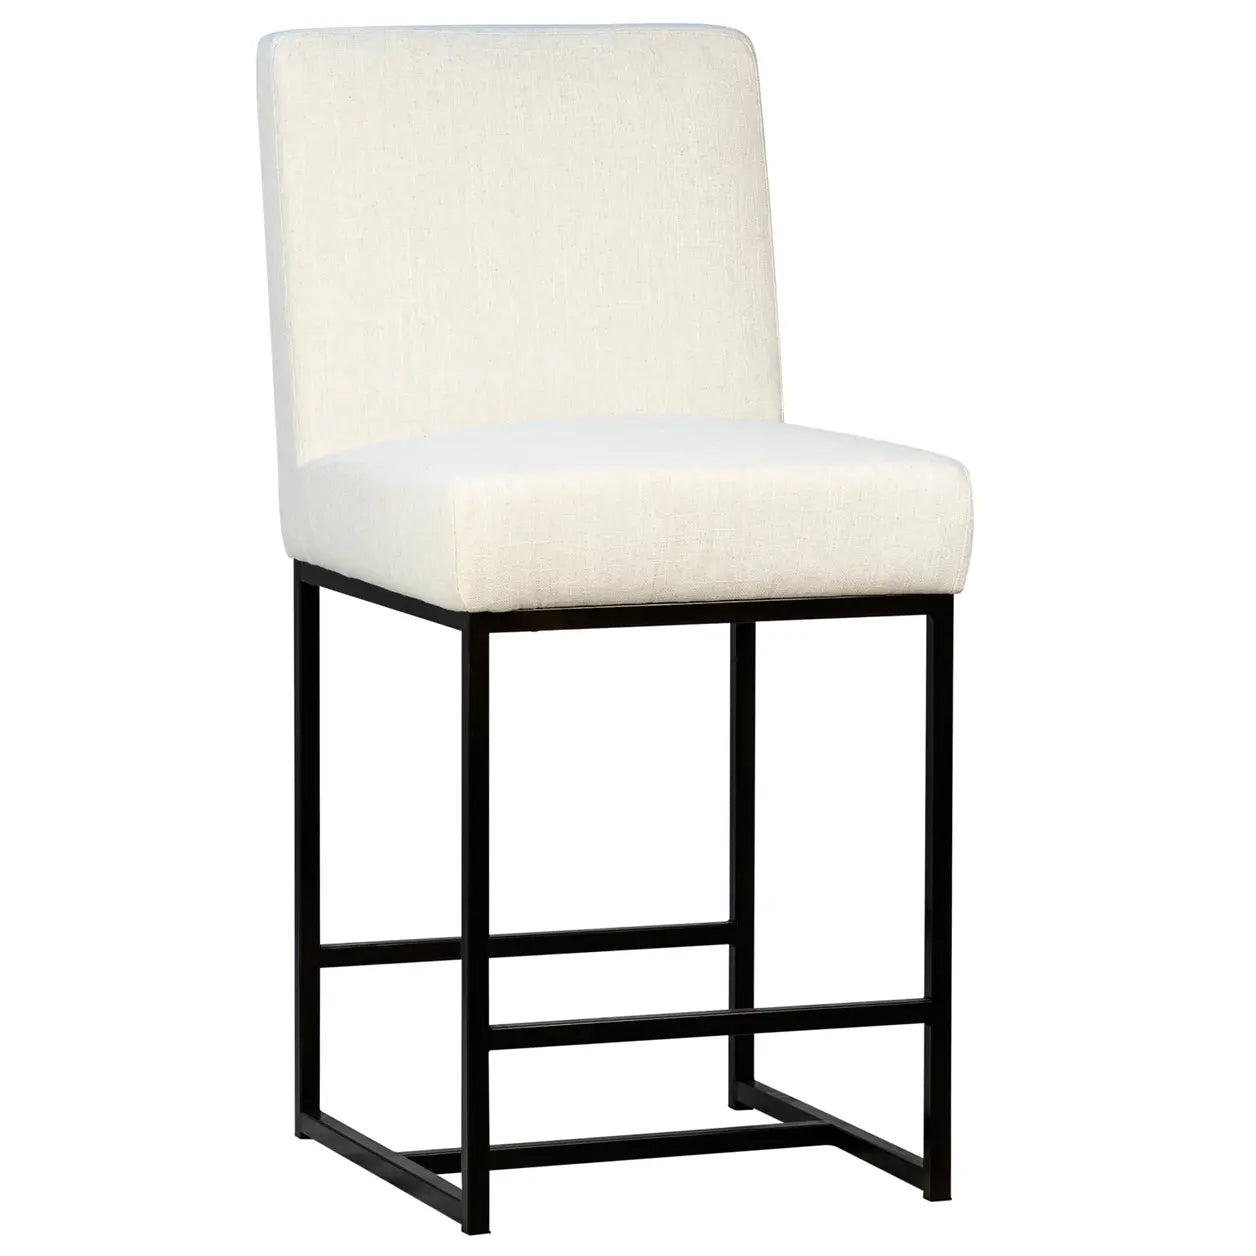 Mayes 25" Counter Stool with Performance Fabric - Cream, set of 2